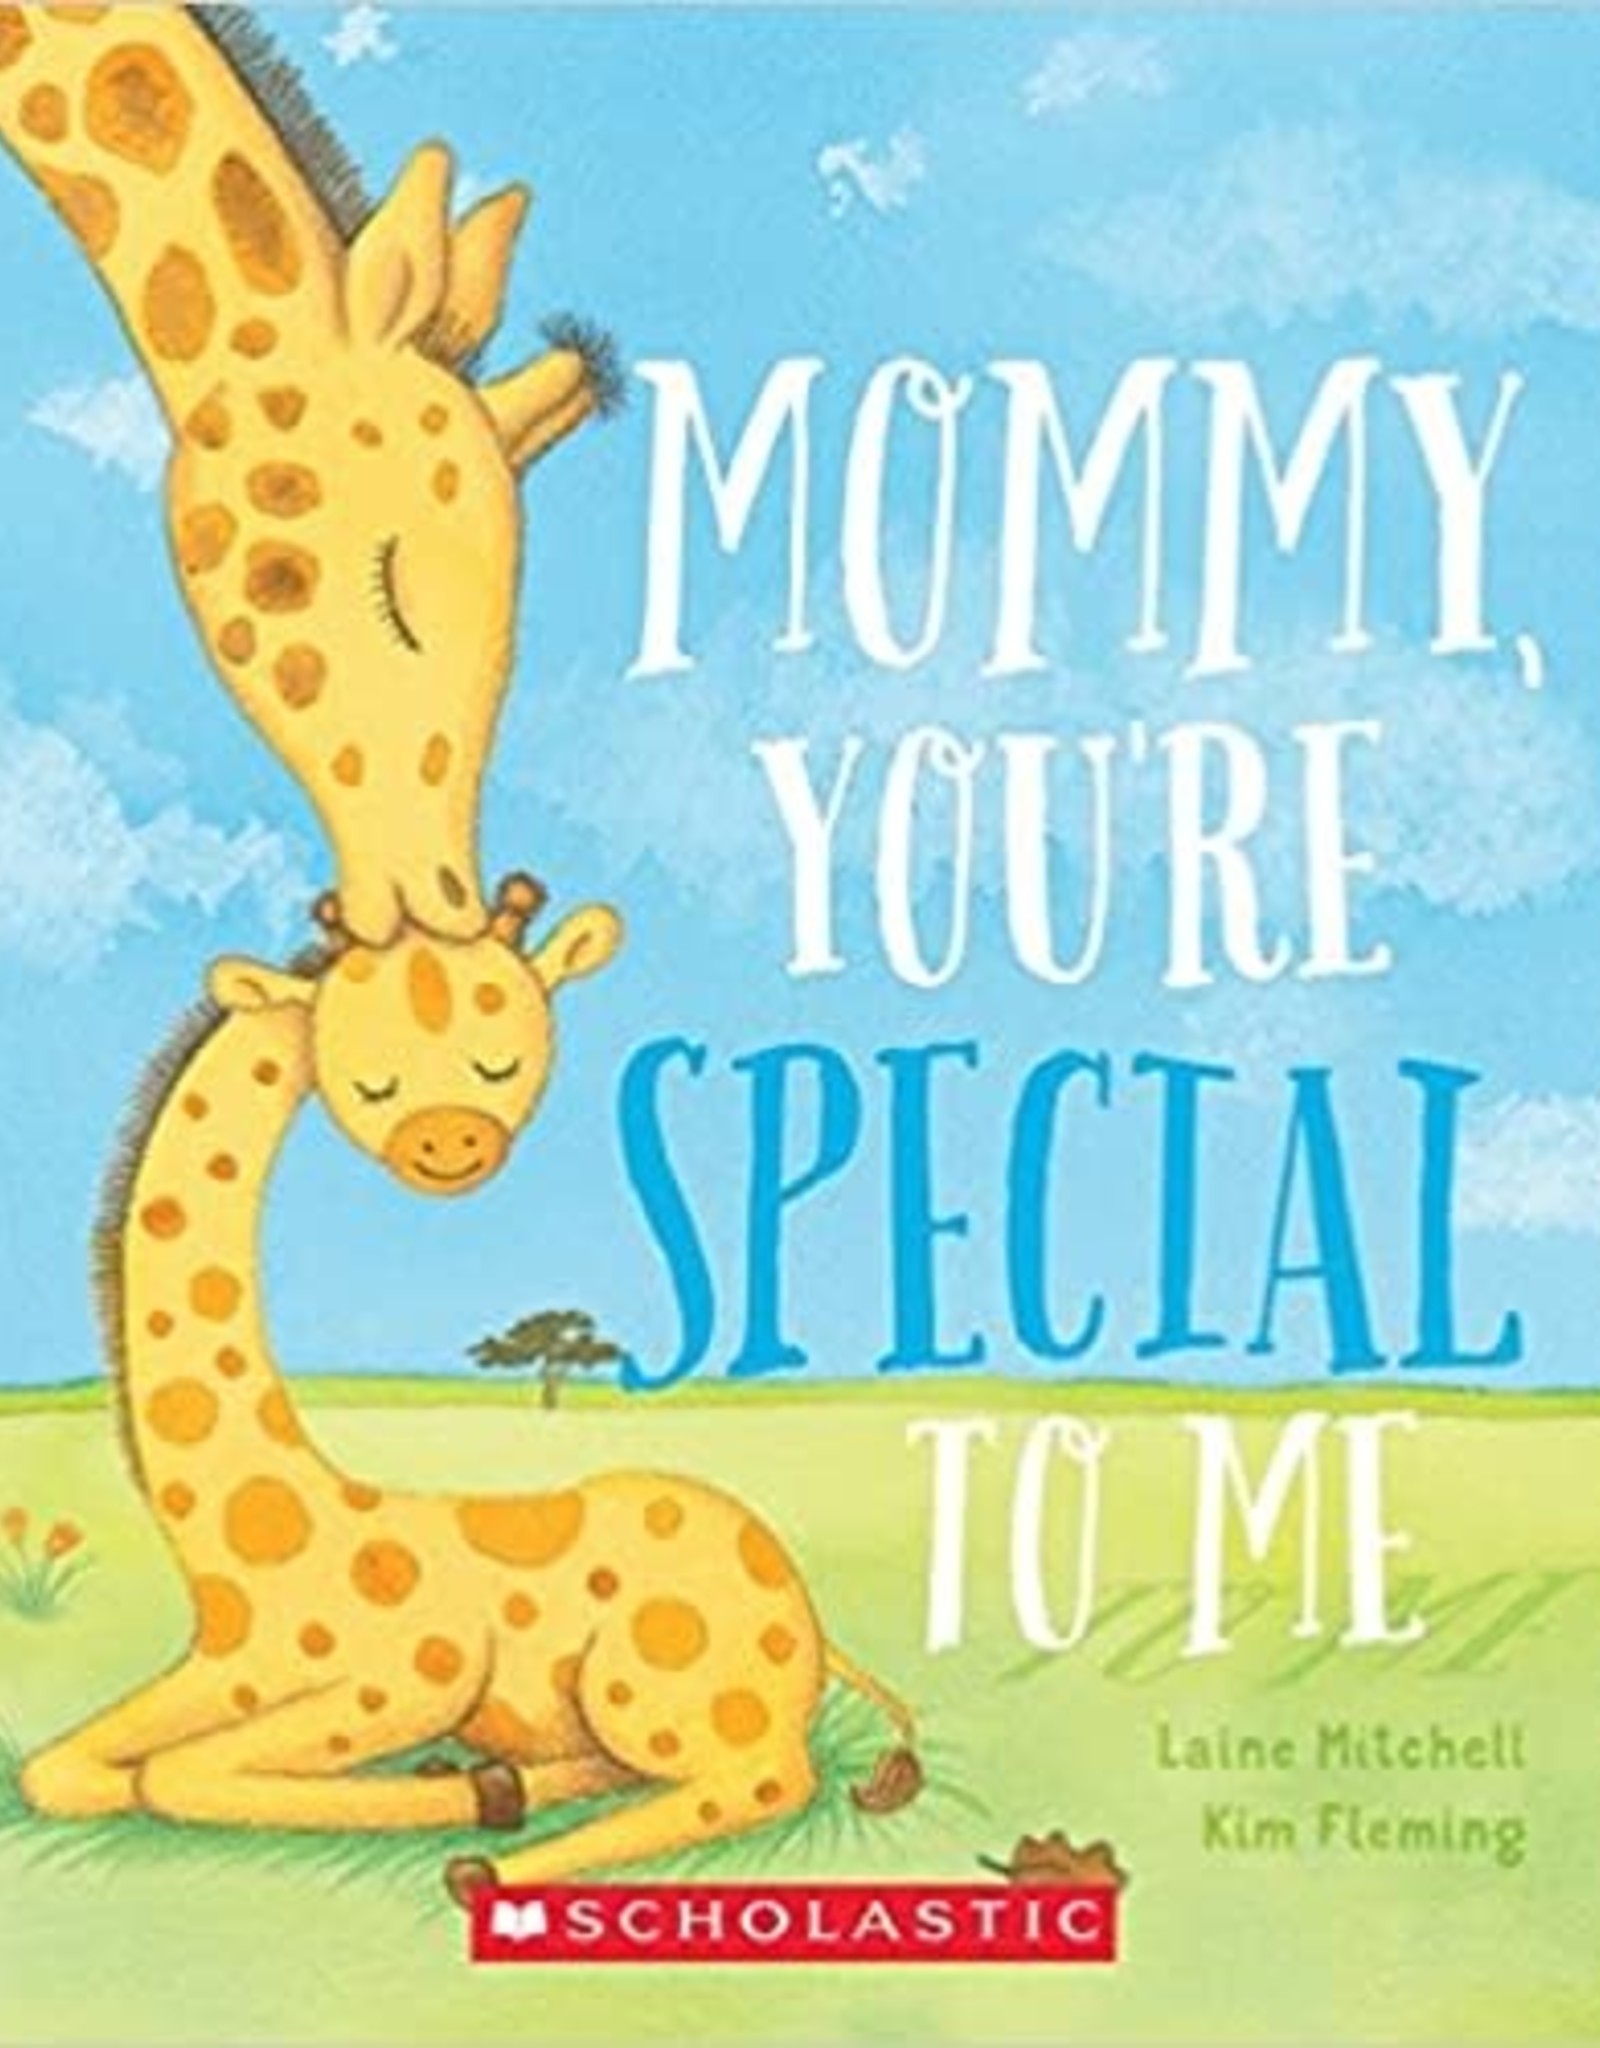 Scholastic Mommy, You're Special To Me